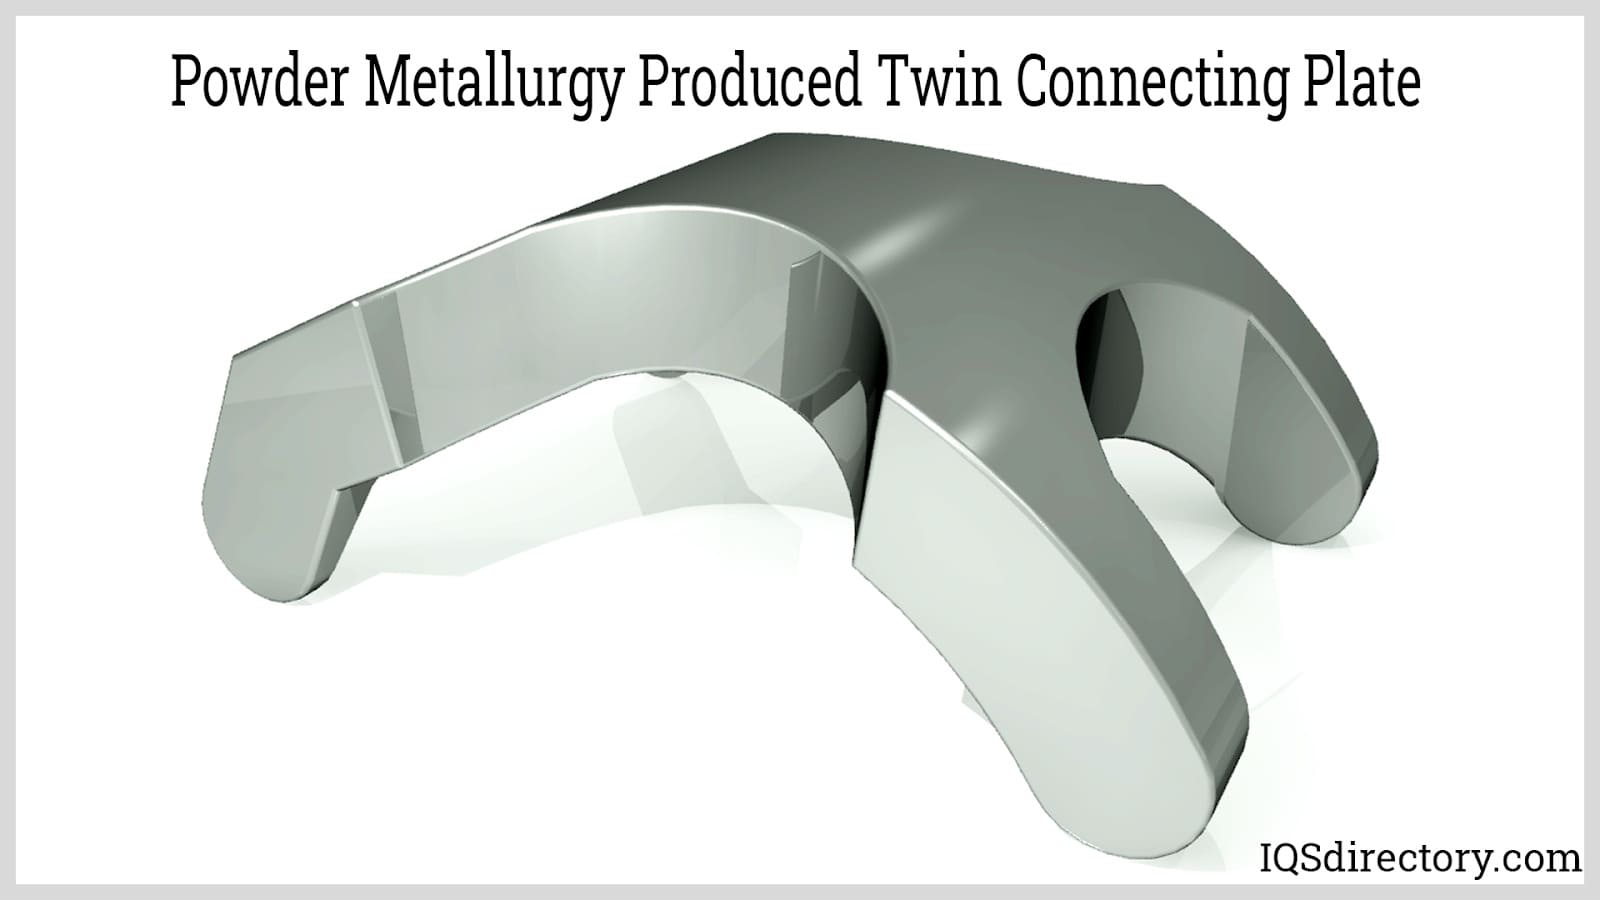 Powder Metallurgy Produced Twin Connecting Plate